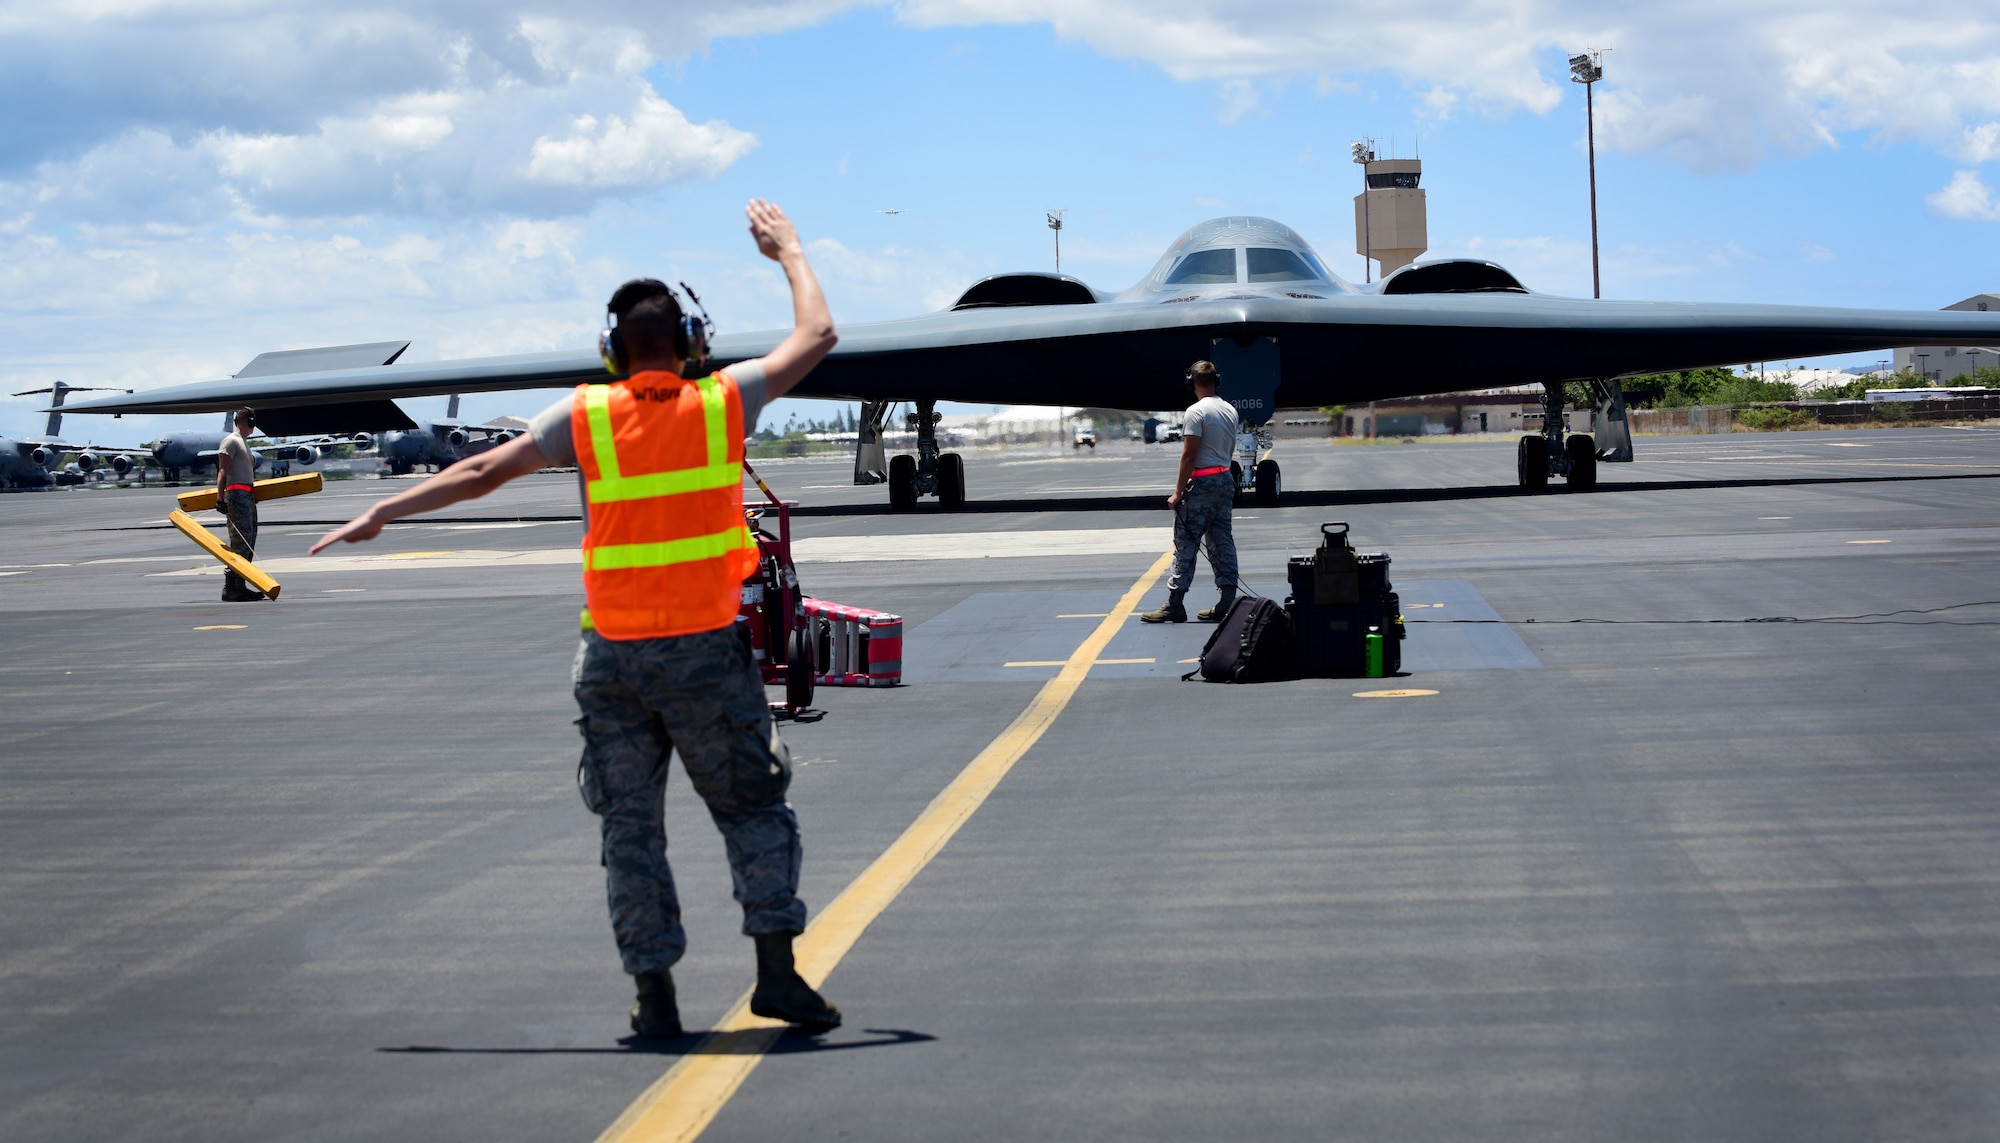 A U.S. Air Force maintenance technician from Whiteman Air Force Base, Missouri, marshals a B-2 Spirit at Joint Base Pearl Harbor-Hickam, Hawaii, Aug. 15, 2018. B-2s regularly rotate through the Indo-Pacific to conduct routine air operations, which integrate capabilities with key regional partners and demonstrate U.S. commitment to peace and stability in the region. These operations are in support of the U.S. Strategic Command’s Bomber Task Force deployment. (U.S. Air Force photo by Staff Sgt. Danielle Quilla)